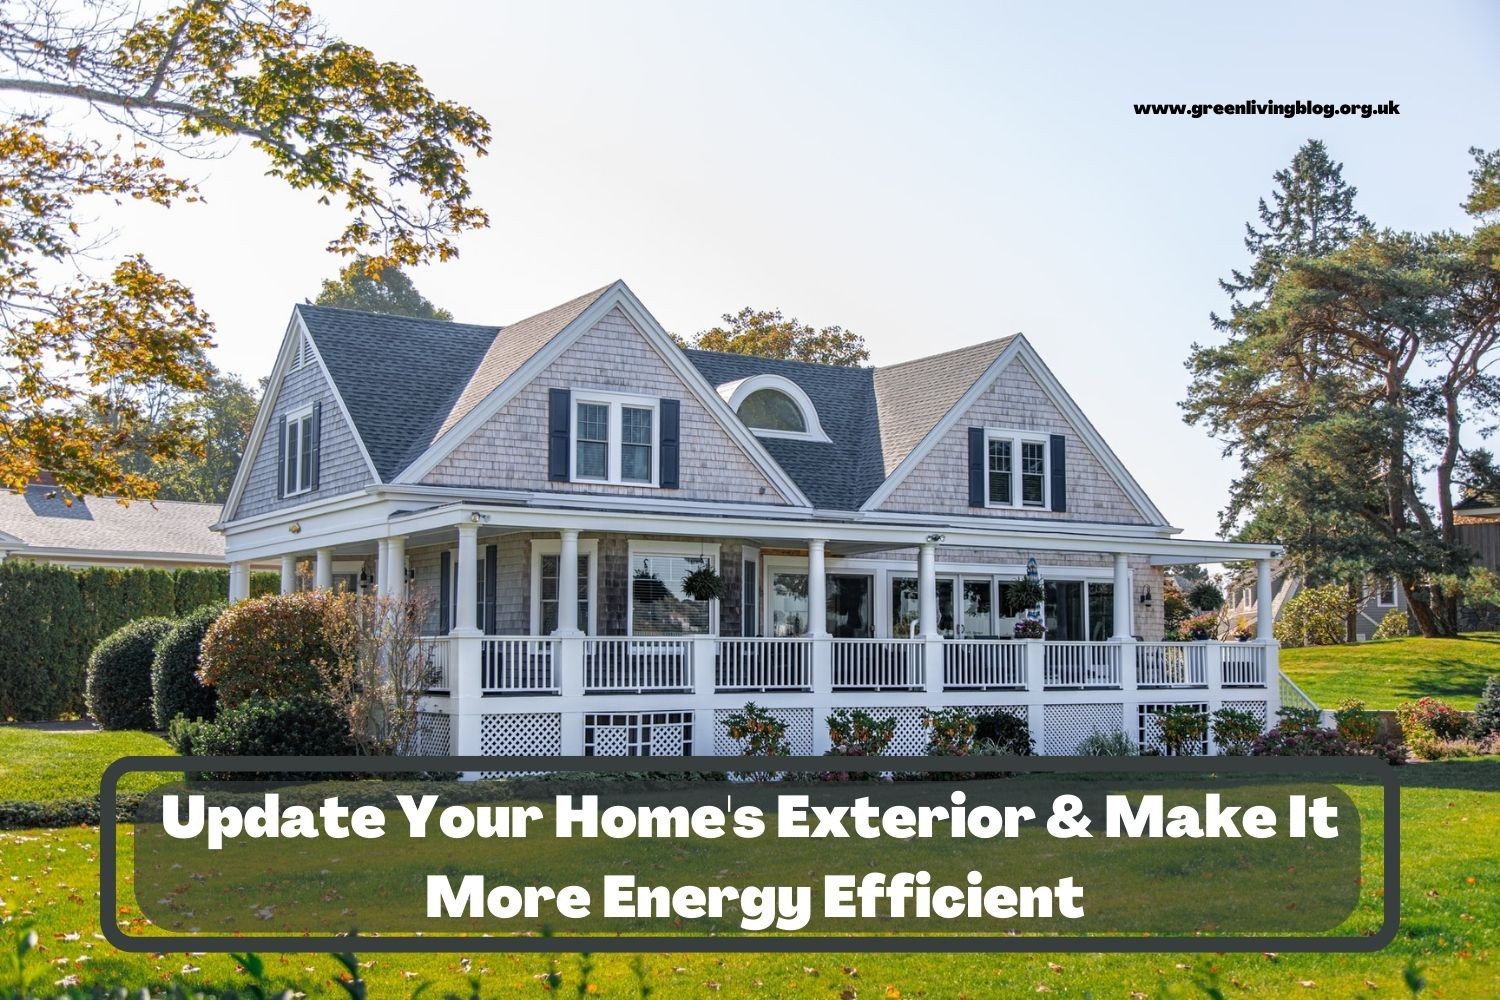 Update Your Home’s Exterior & Make It More Energy Efficient